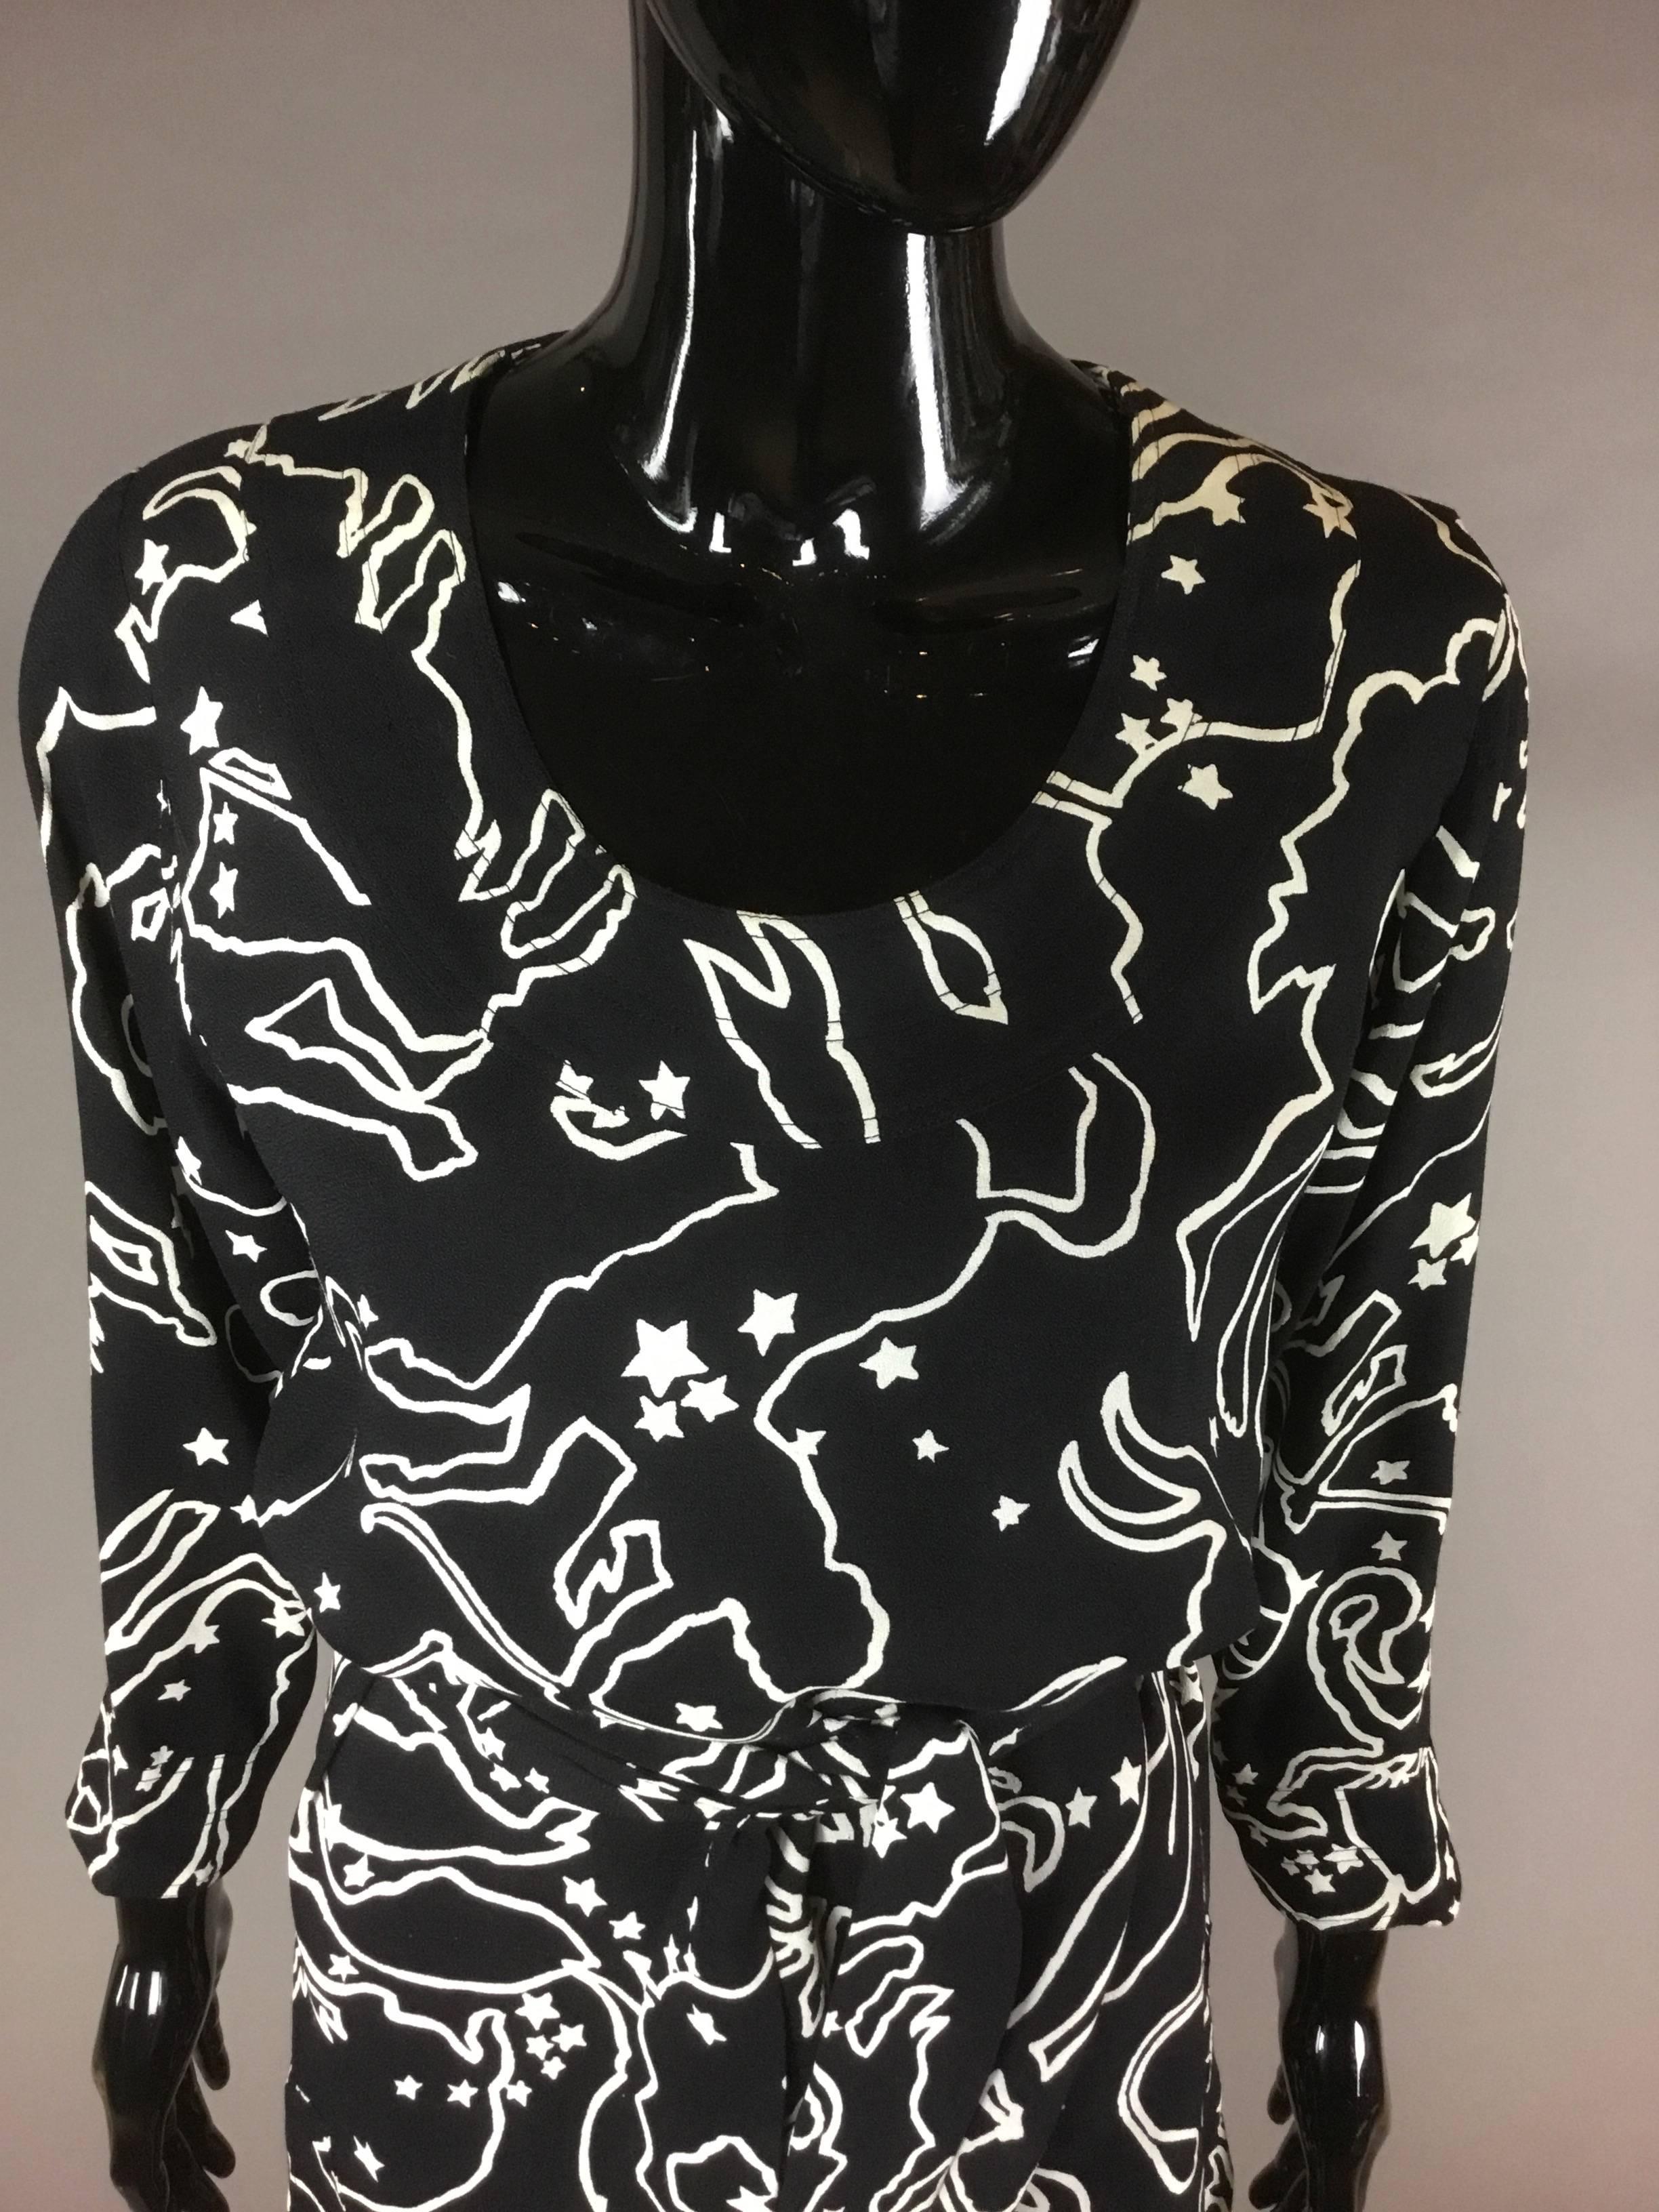 An iconic zodiac print dress by YSL from the eighties.
This is a long sleeve simple shape tunic with four inch slits at either side, and a long self belt. 